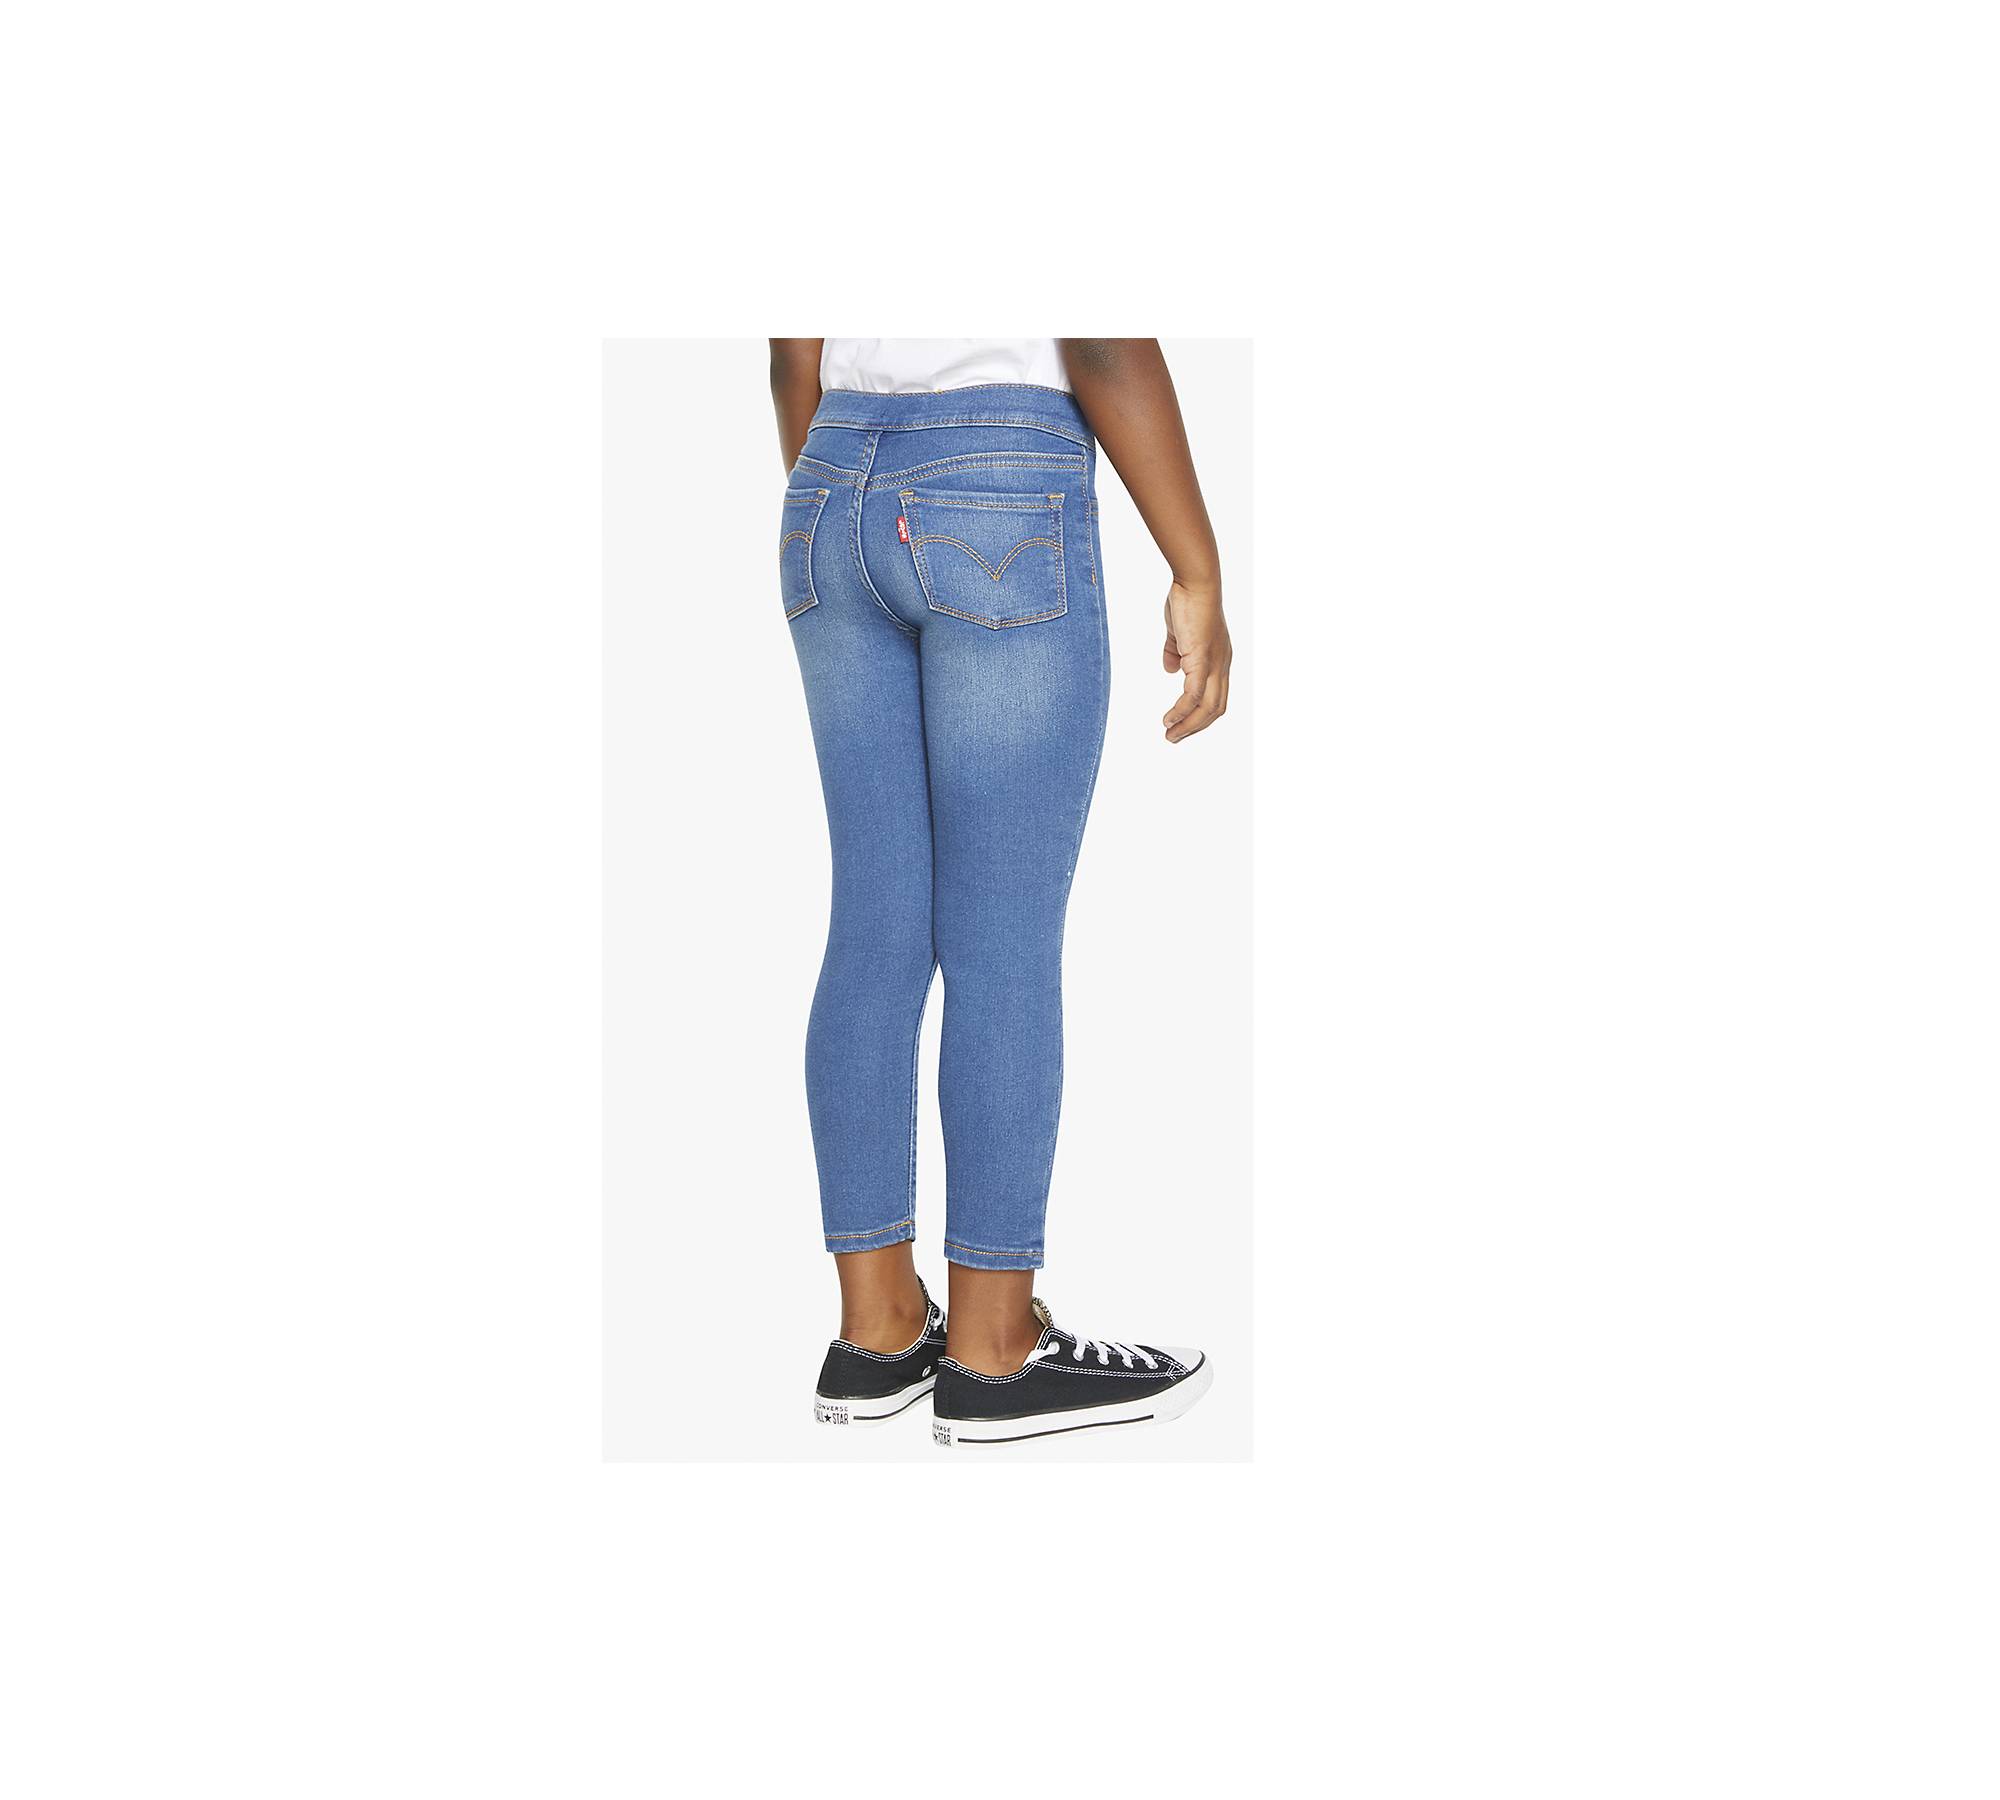 Levi's® Girls' Pull-On Mid-Rise Jeggings - Todey Light Wash 8